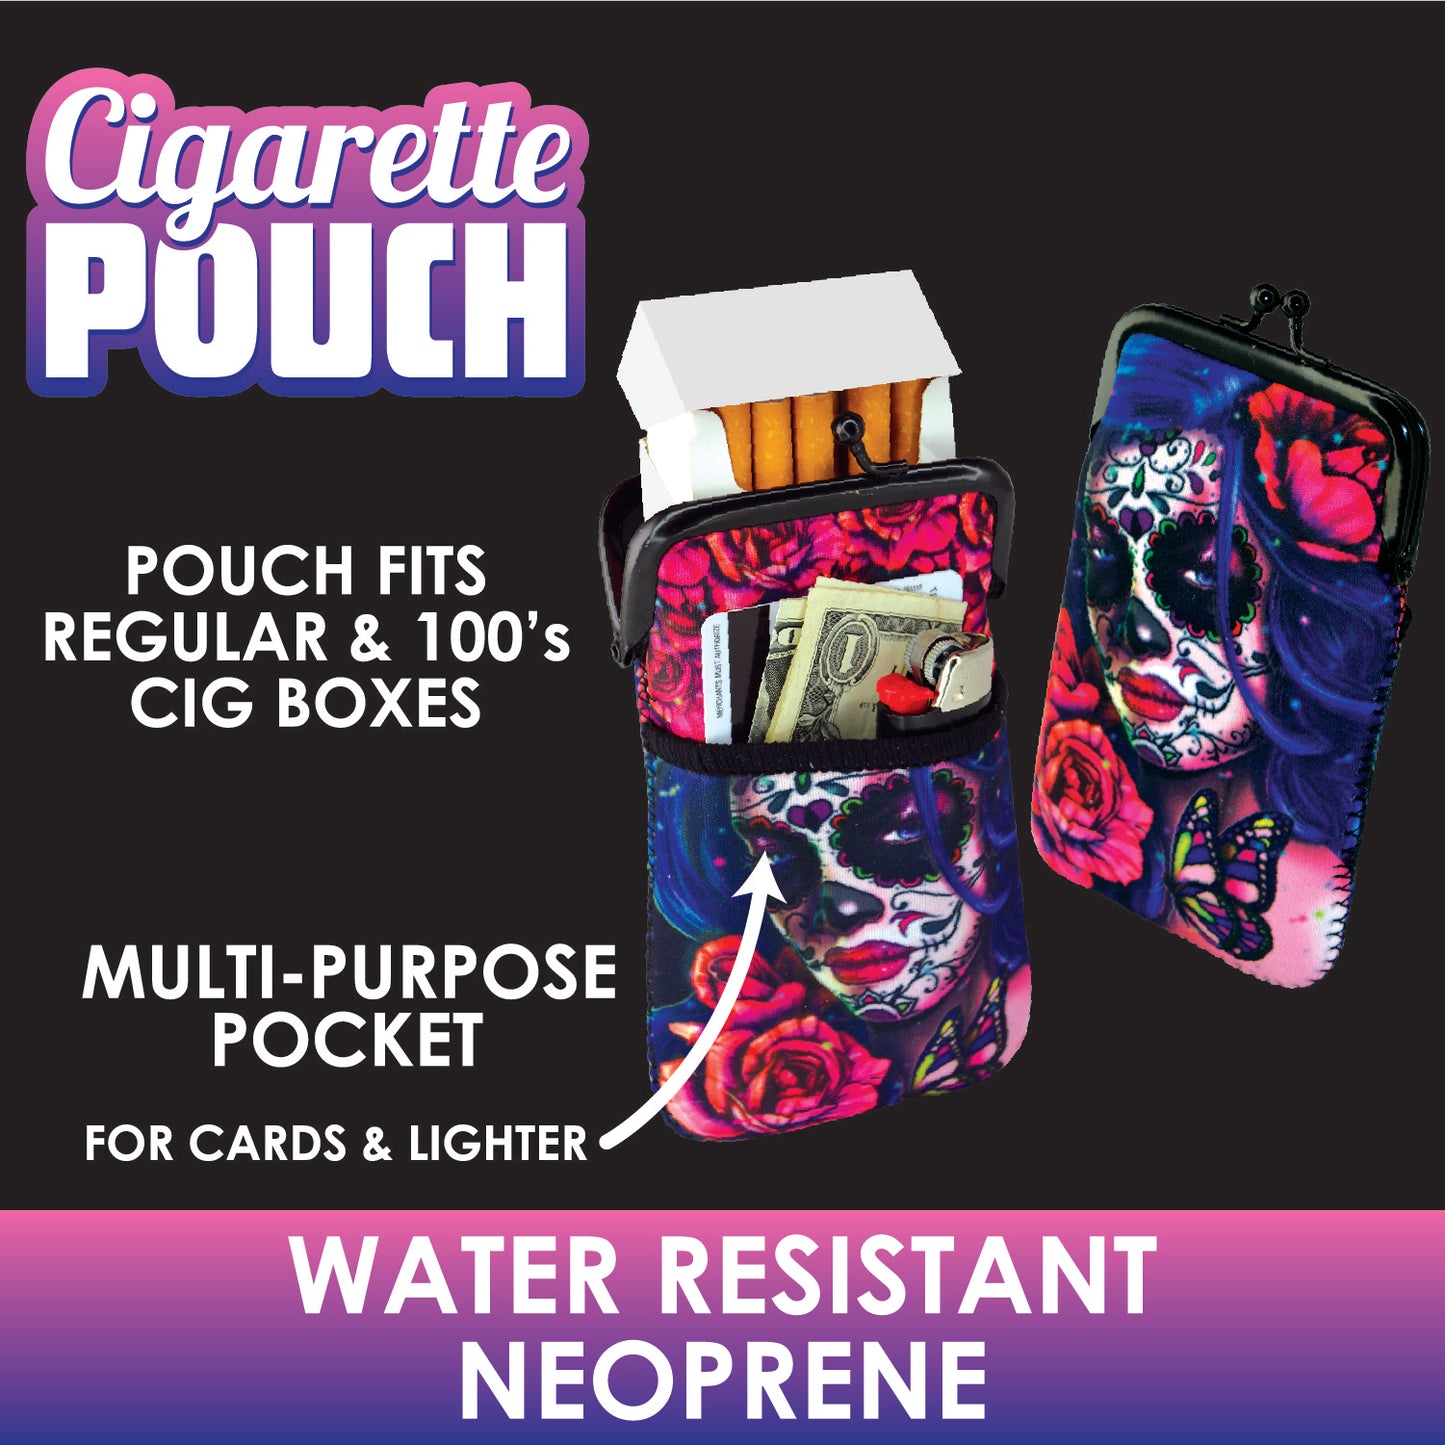 ITEM NUMBER 026667 NEOPRENE CIG POUCH POCKET D 8 PIECES PER DISPLAY